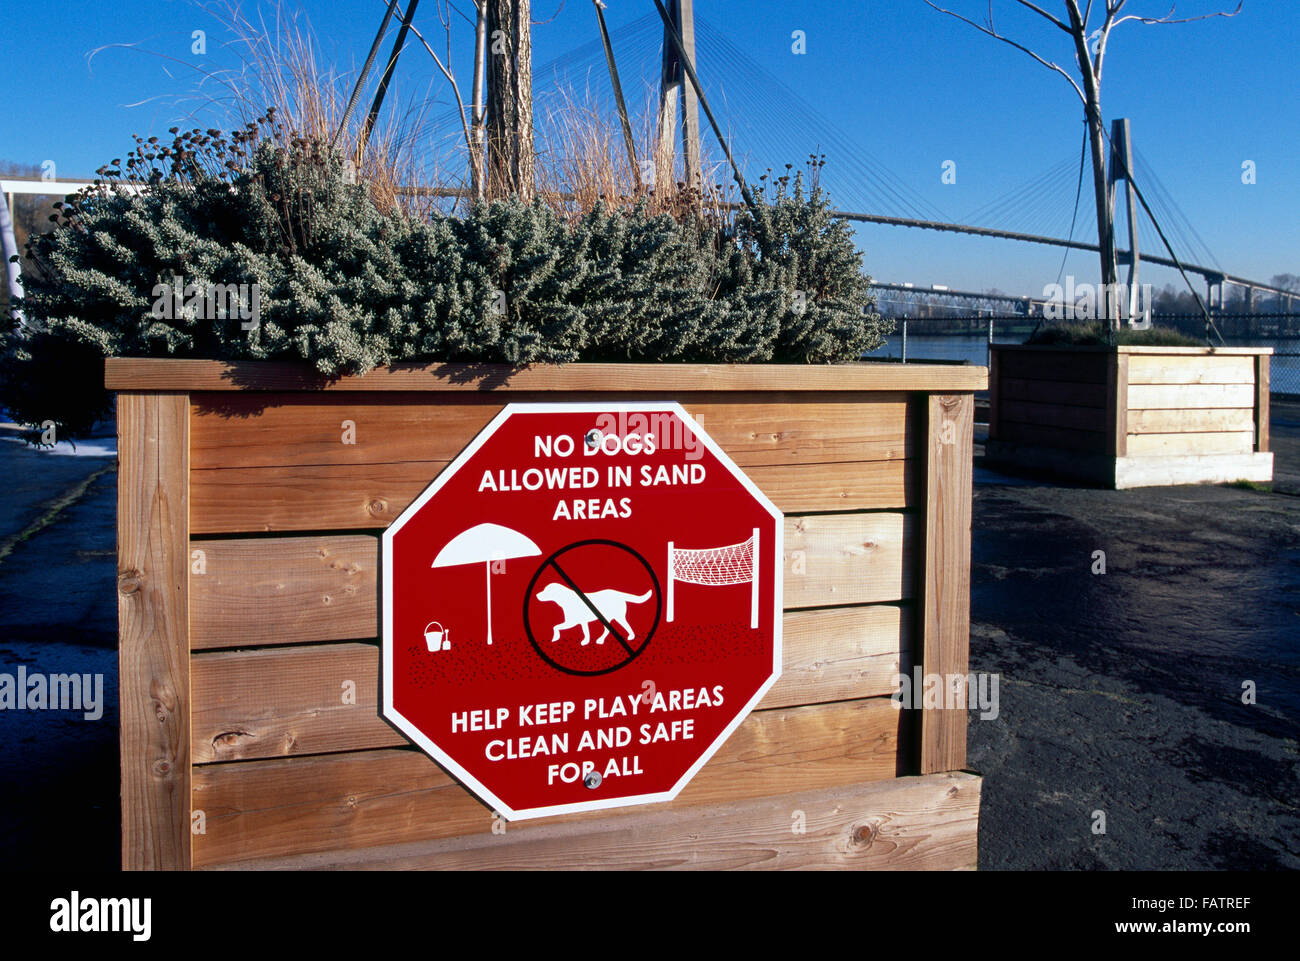 No Dogs Allowed in Sand Areas Sign, Westminster Pier Park, New Westminster, British Columbia, Canada - Dog Control Information Stock Photo